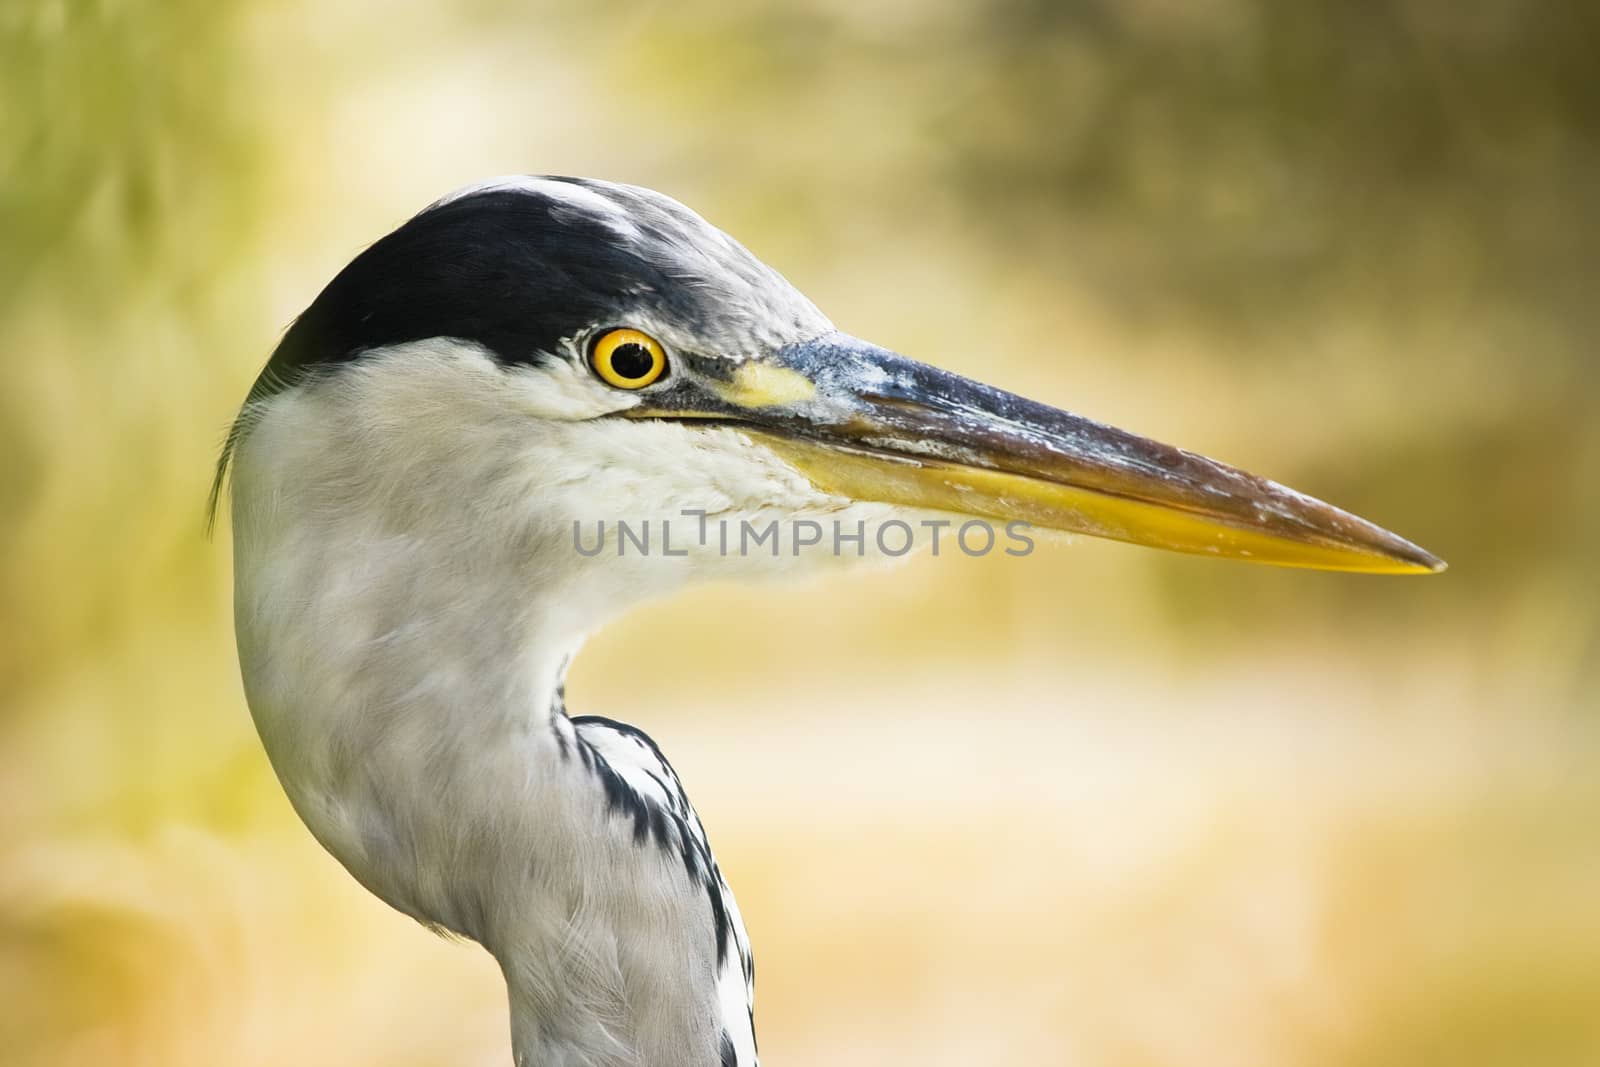 Grey heron head in side angle view with just swallowed fish and sunny autumn background